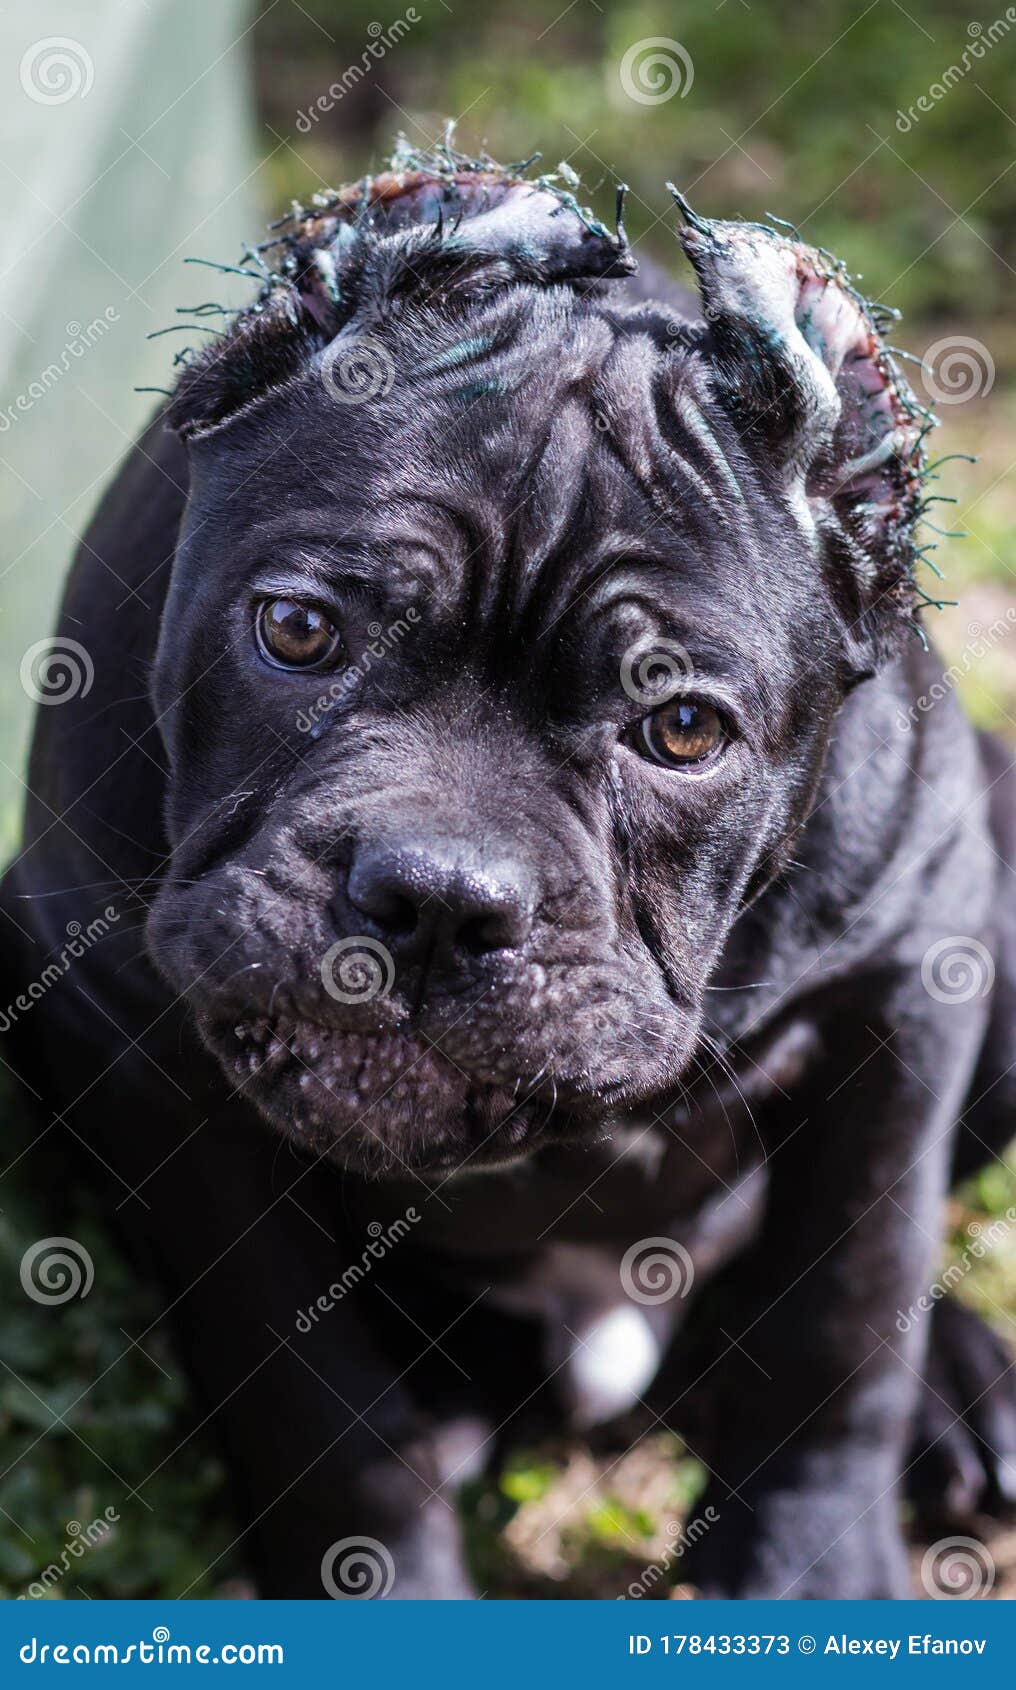 CaneCorso Puppy With Cropped Ears Stock Image Image of